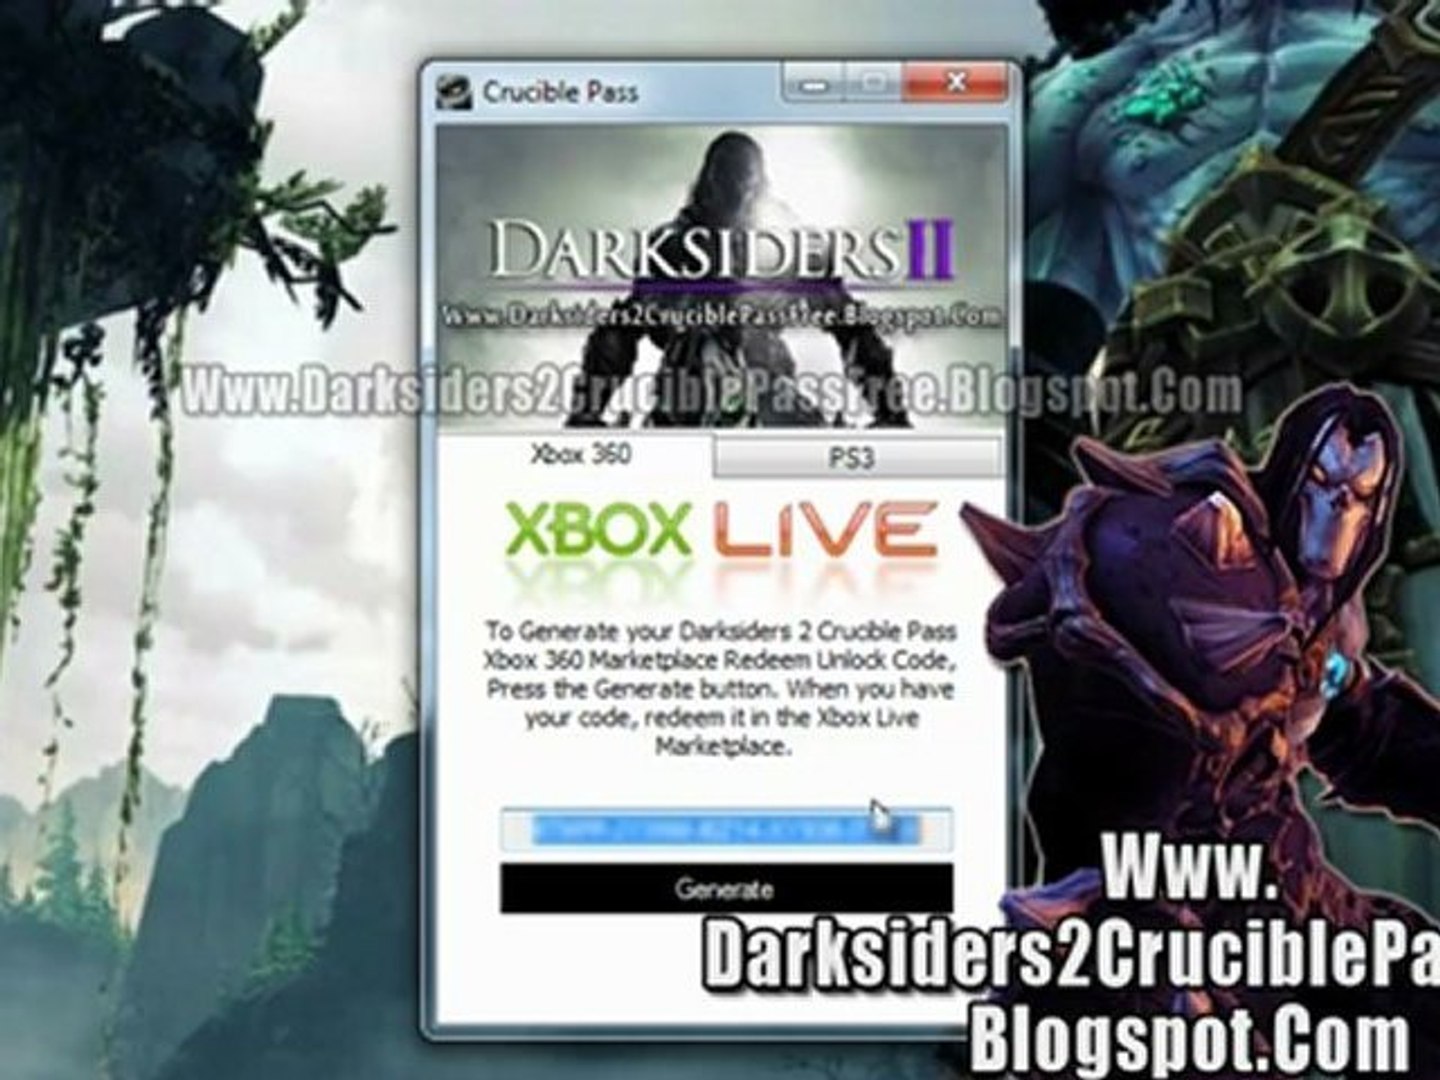 Darksiders 2 Crucible Pass Free Giveaway - Tutorial - video Dailymotion